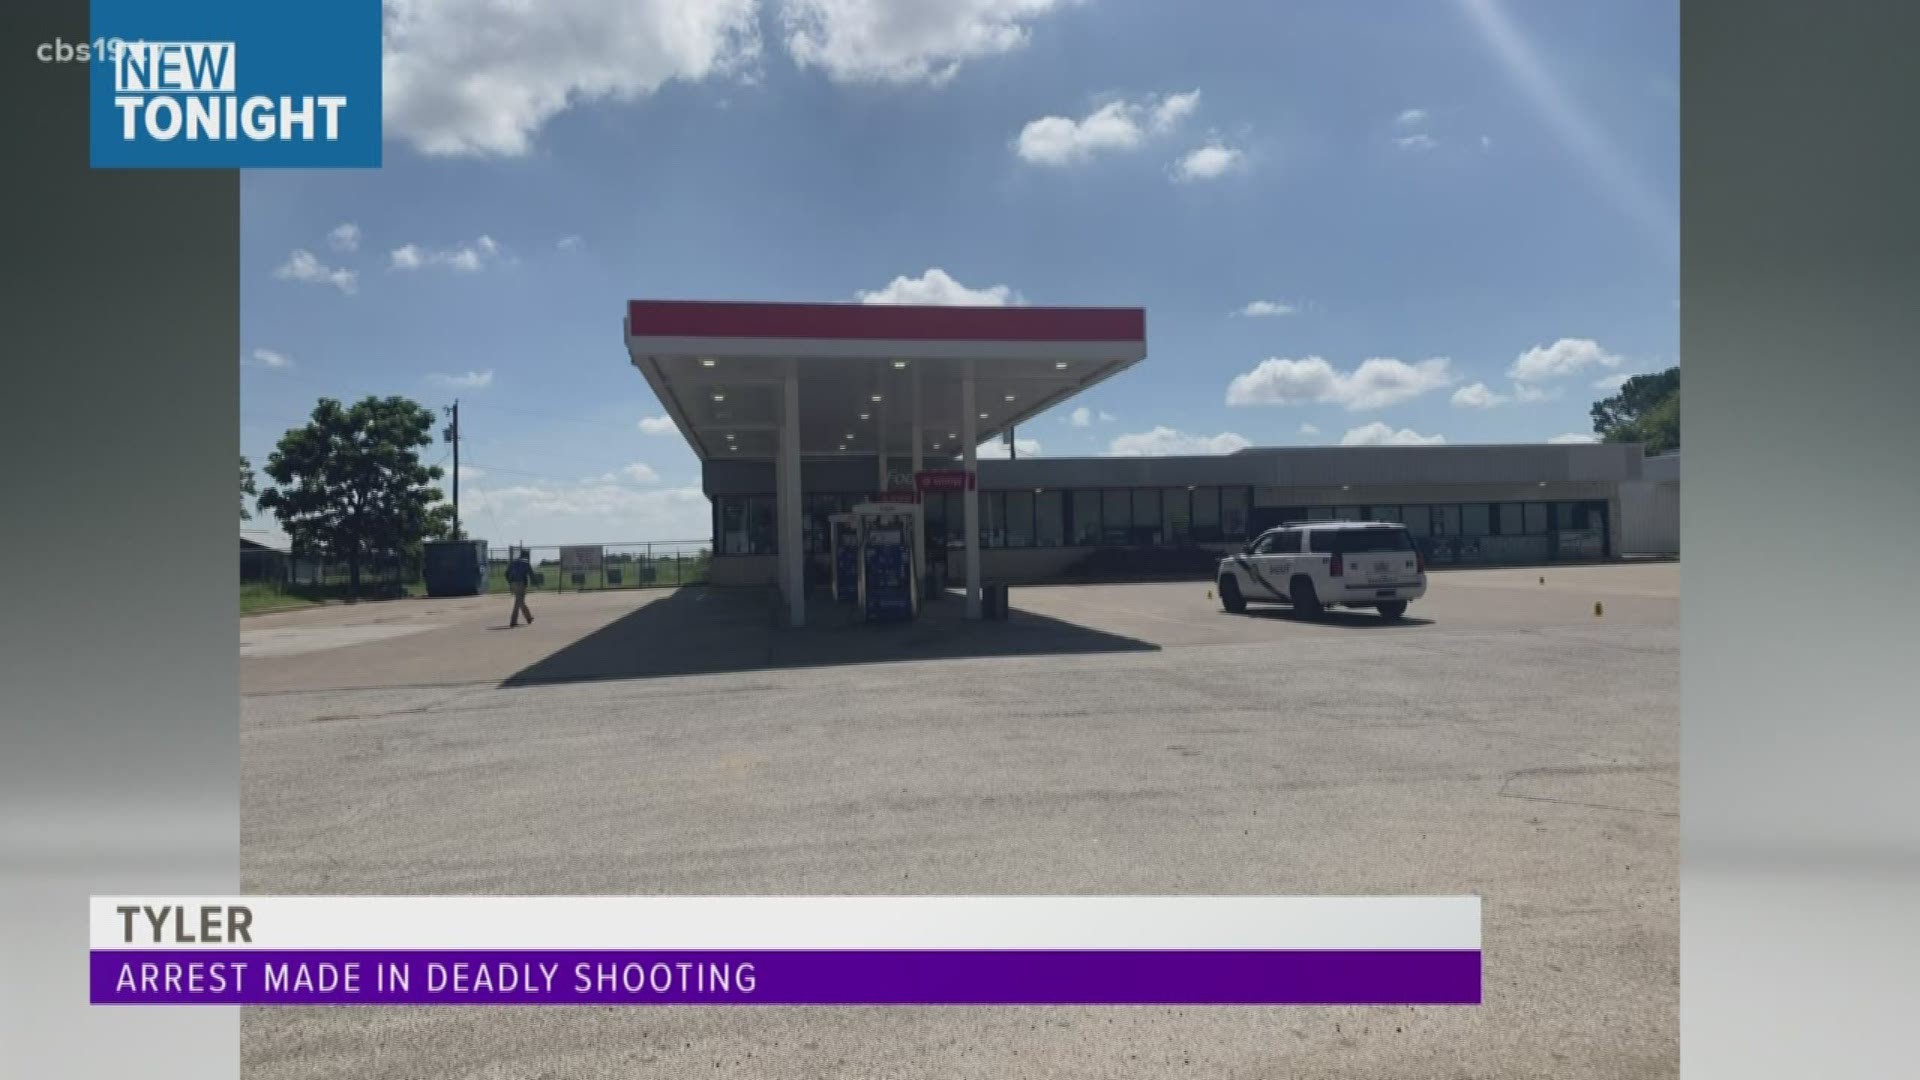 The shooting occurred Monday, July 20.